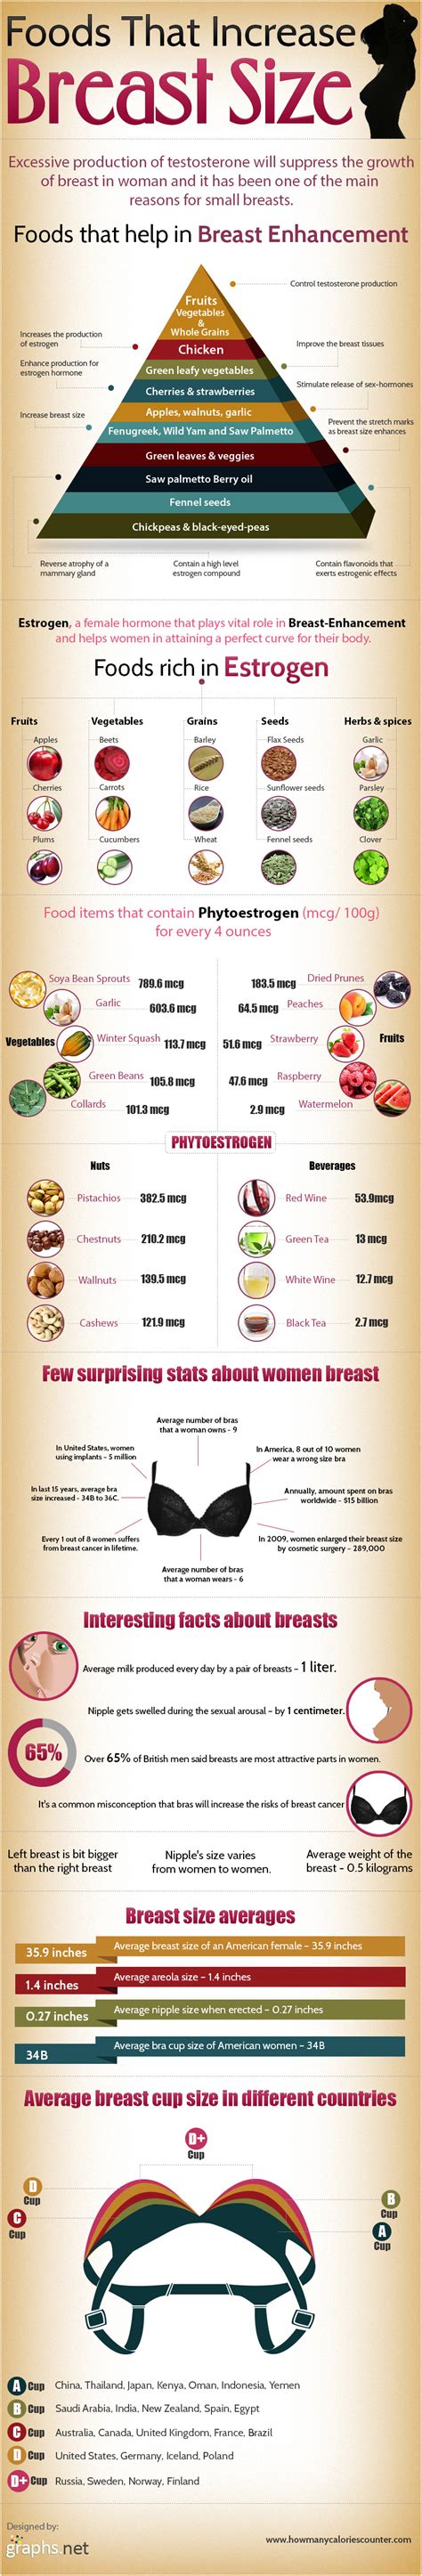 In reality, reducing your breast size will take more than 7 days to actually happen. GOOD NEWS FOR THE LADIES: Foods that Increase Brea*t Size ...